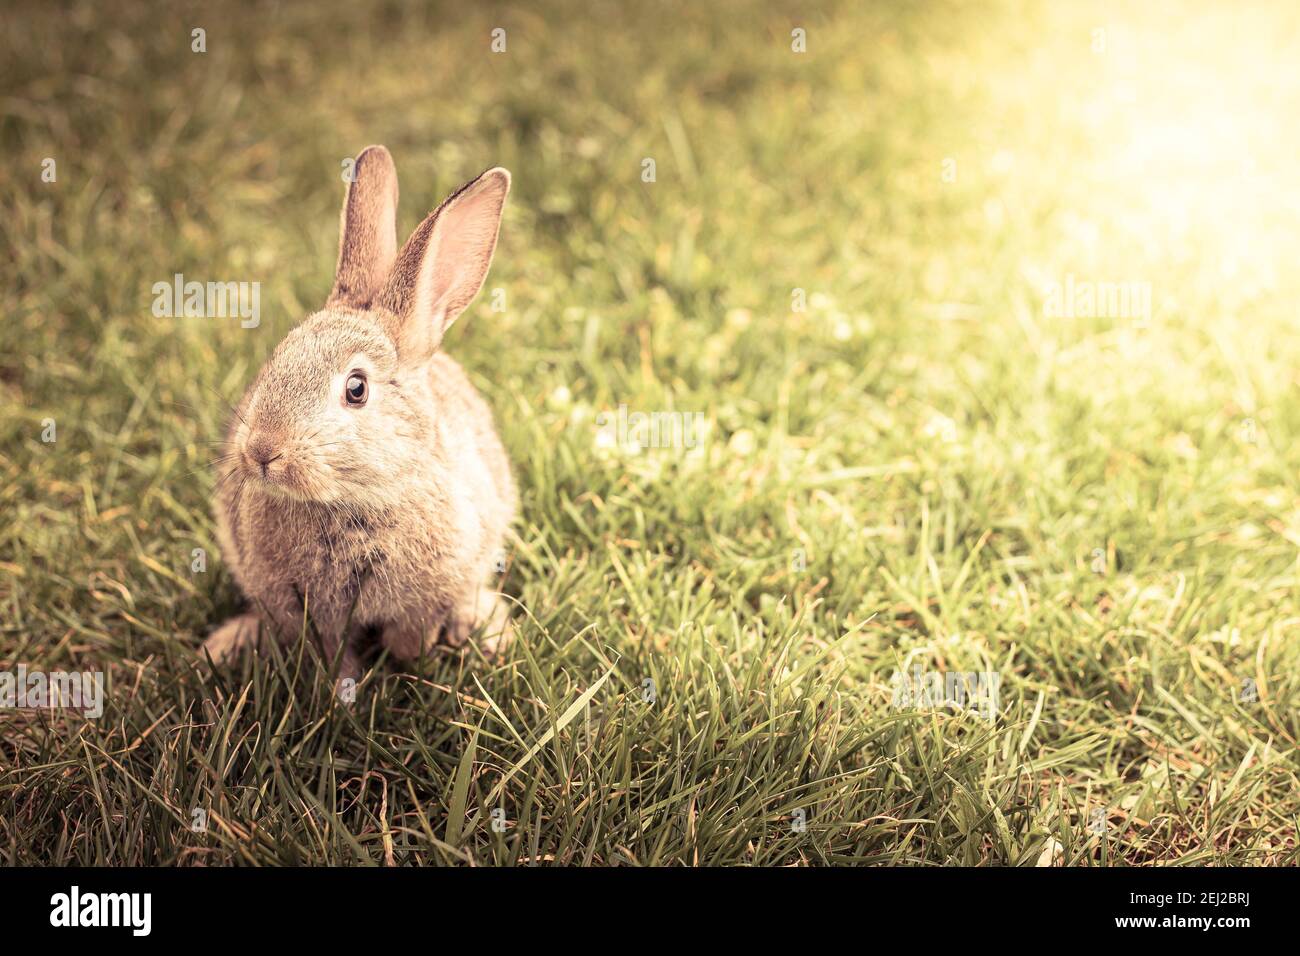 Cute brown Easter bunny in the green grass. Spring background, wallpaper with copy space and sun flare or halo. Vintage tones. Stock Photo